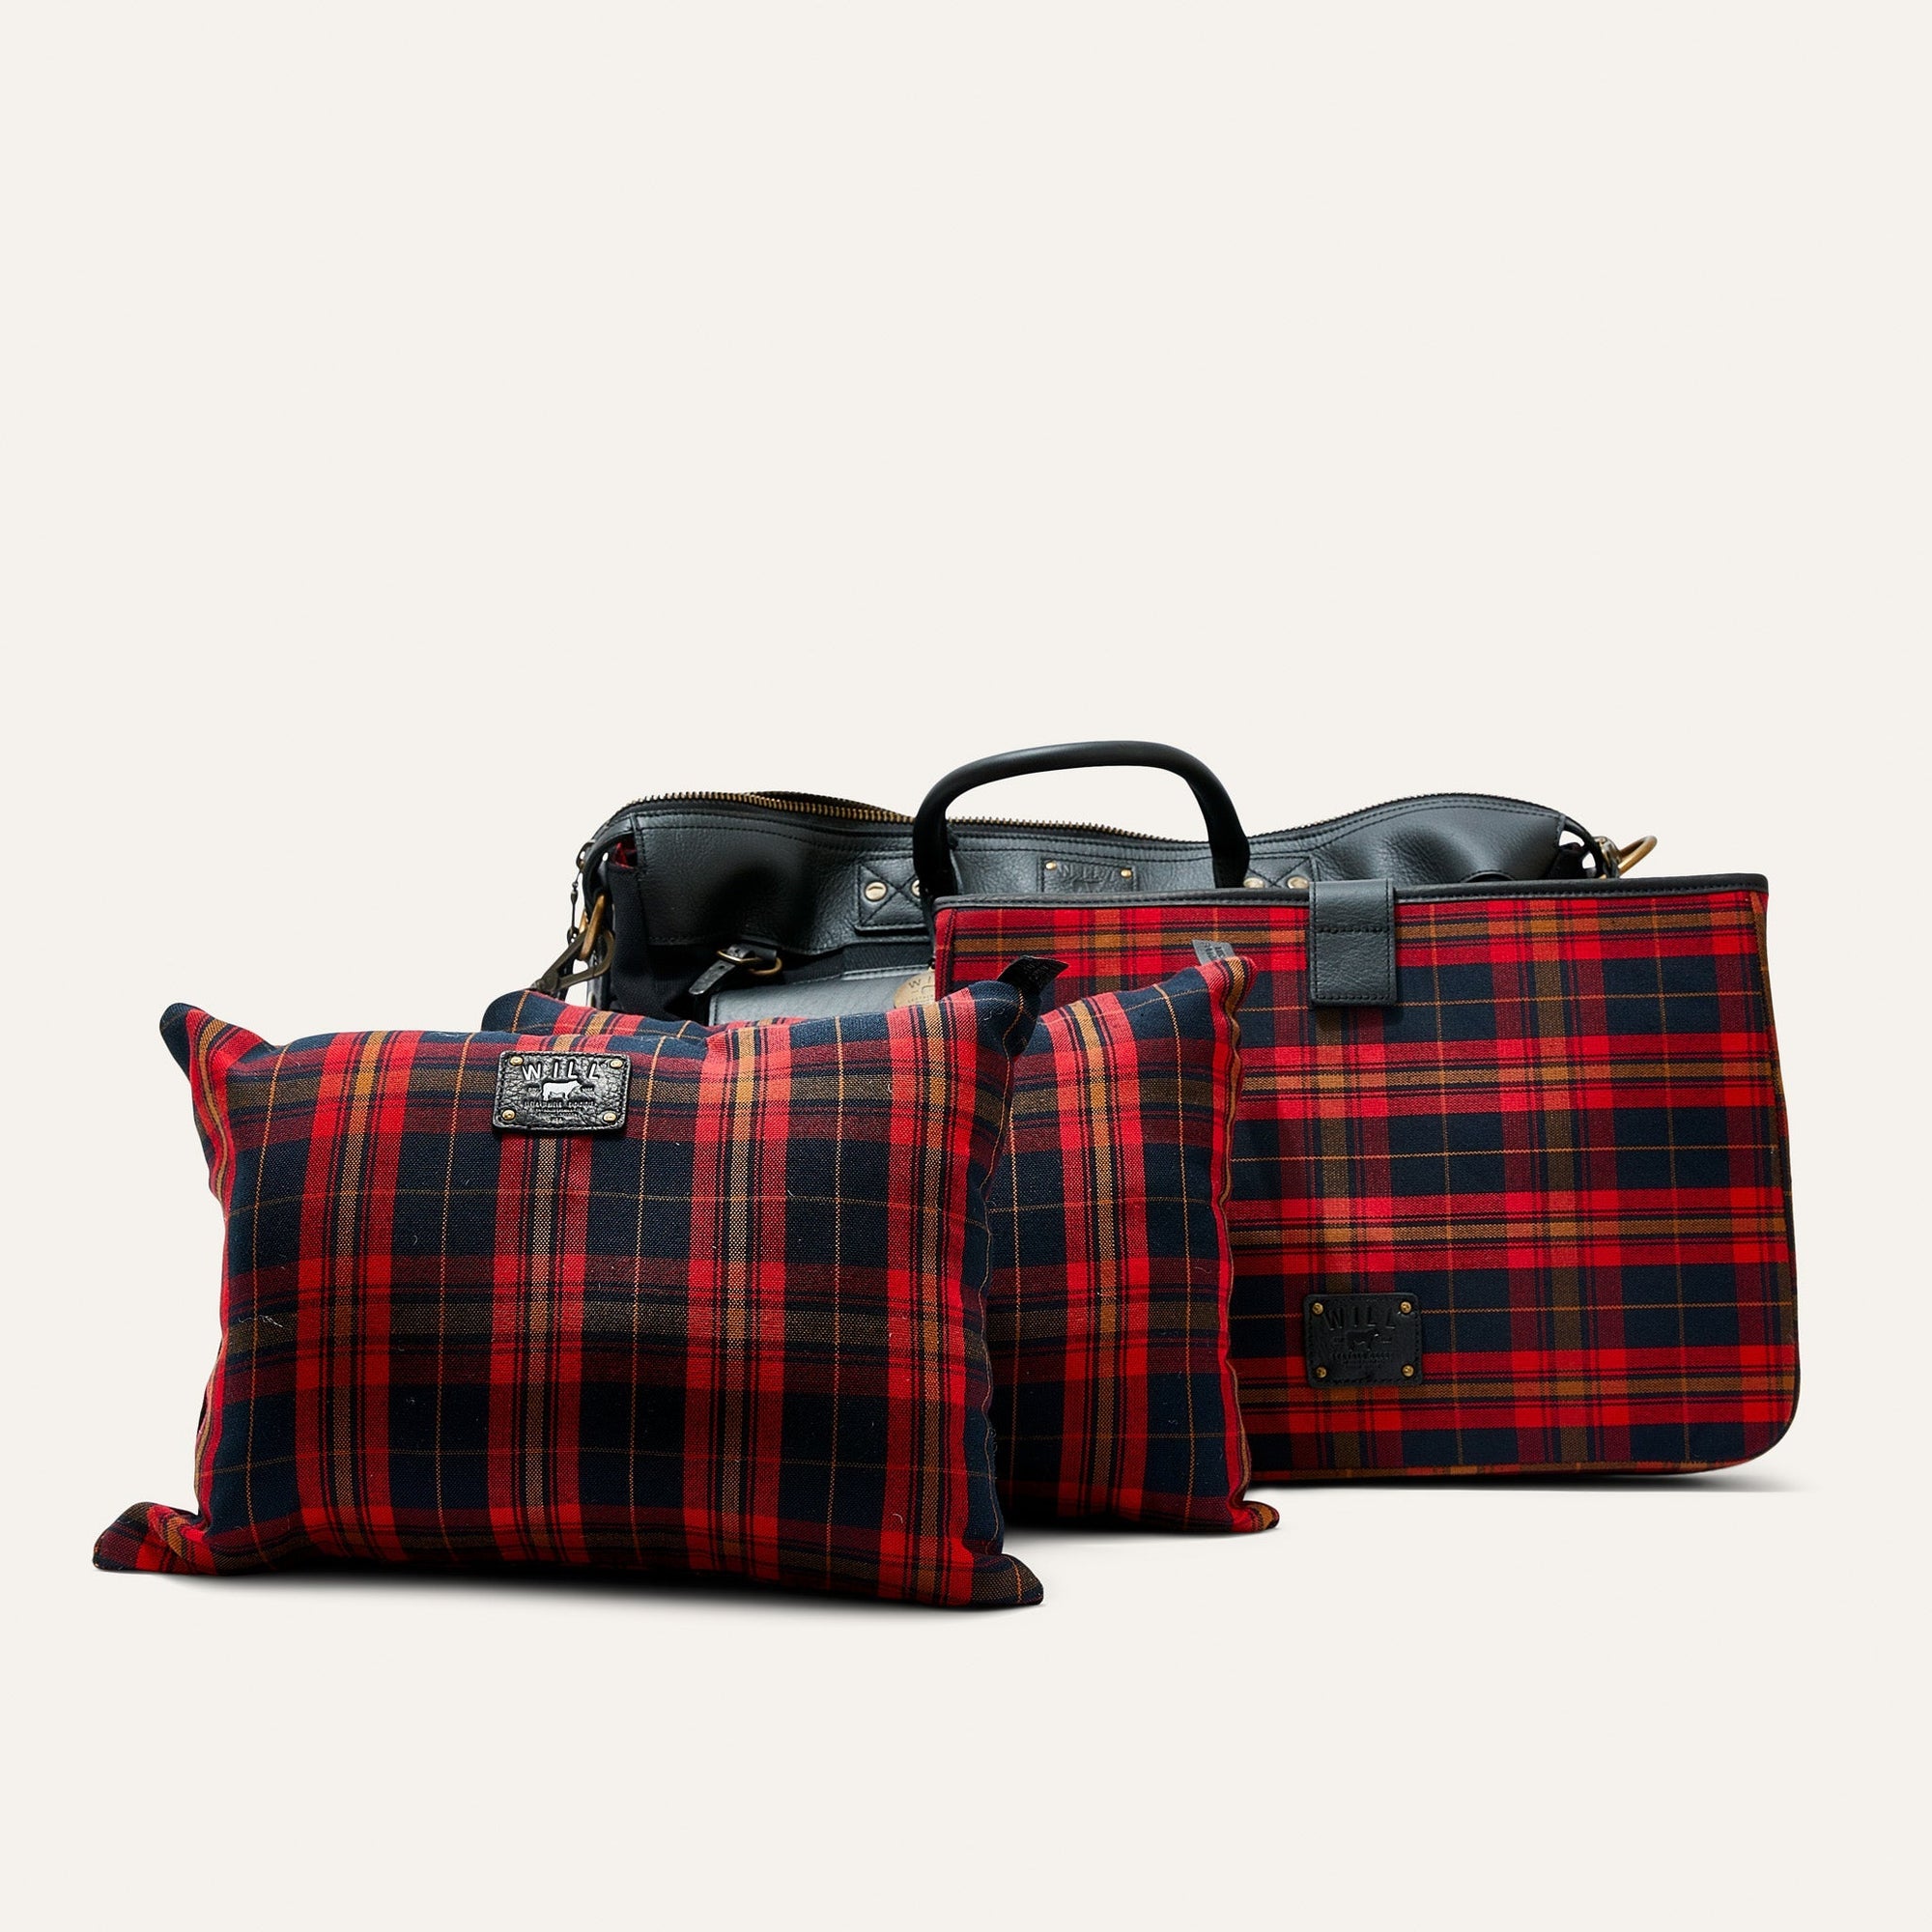 Canvas and Leather Travel Duffle in Black with Black Leather by Will Leather Goods